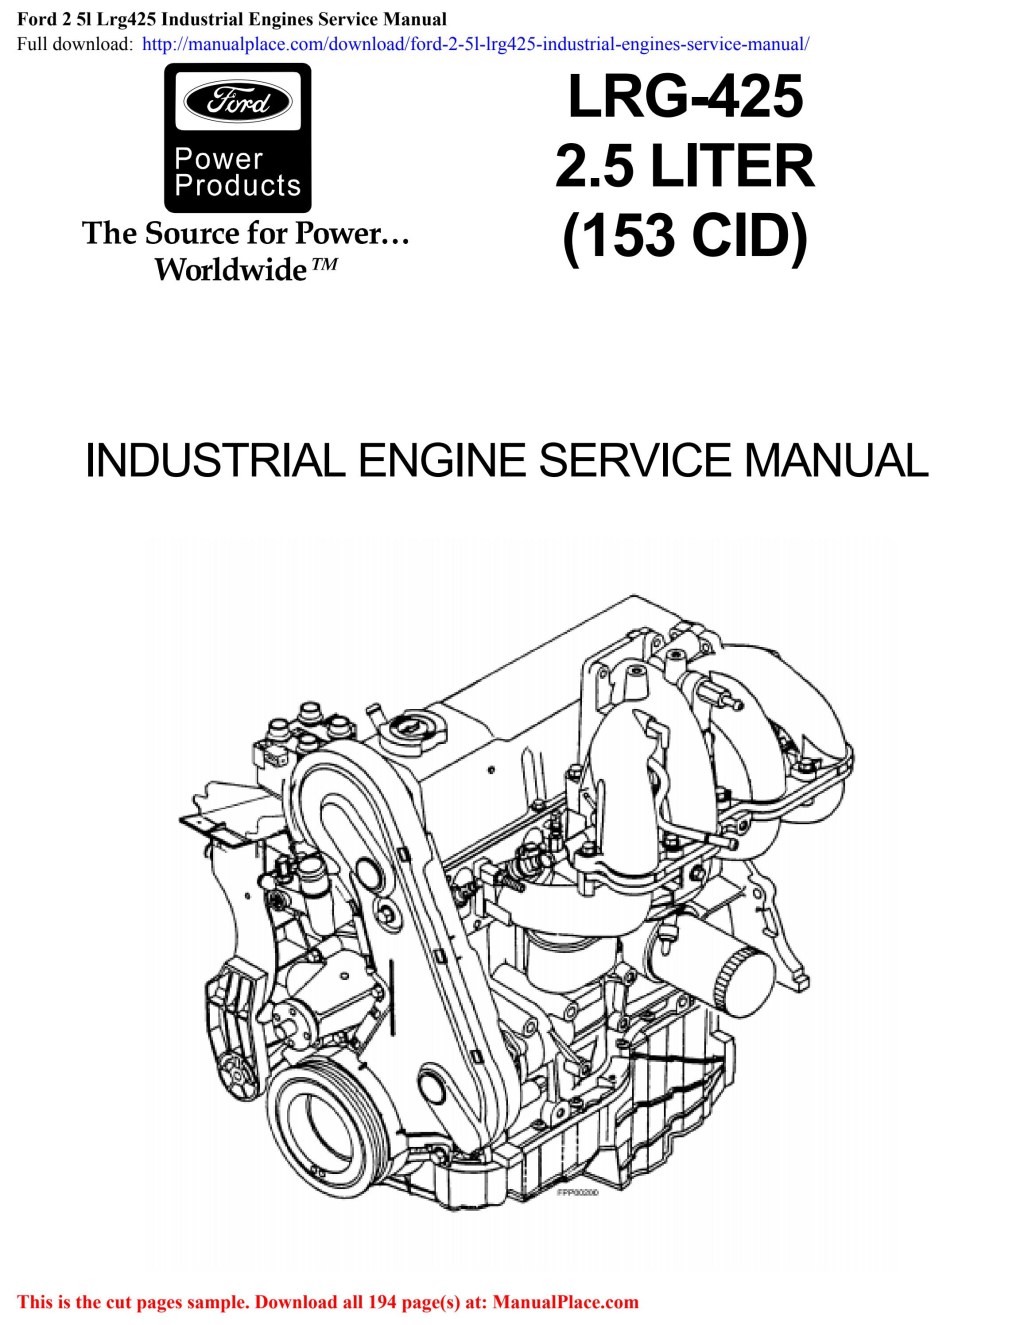 Picture of: Ford  l Lrg4 Industrial Engines Service Manual by